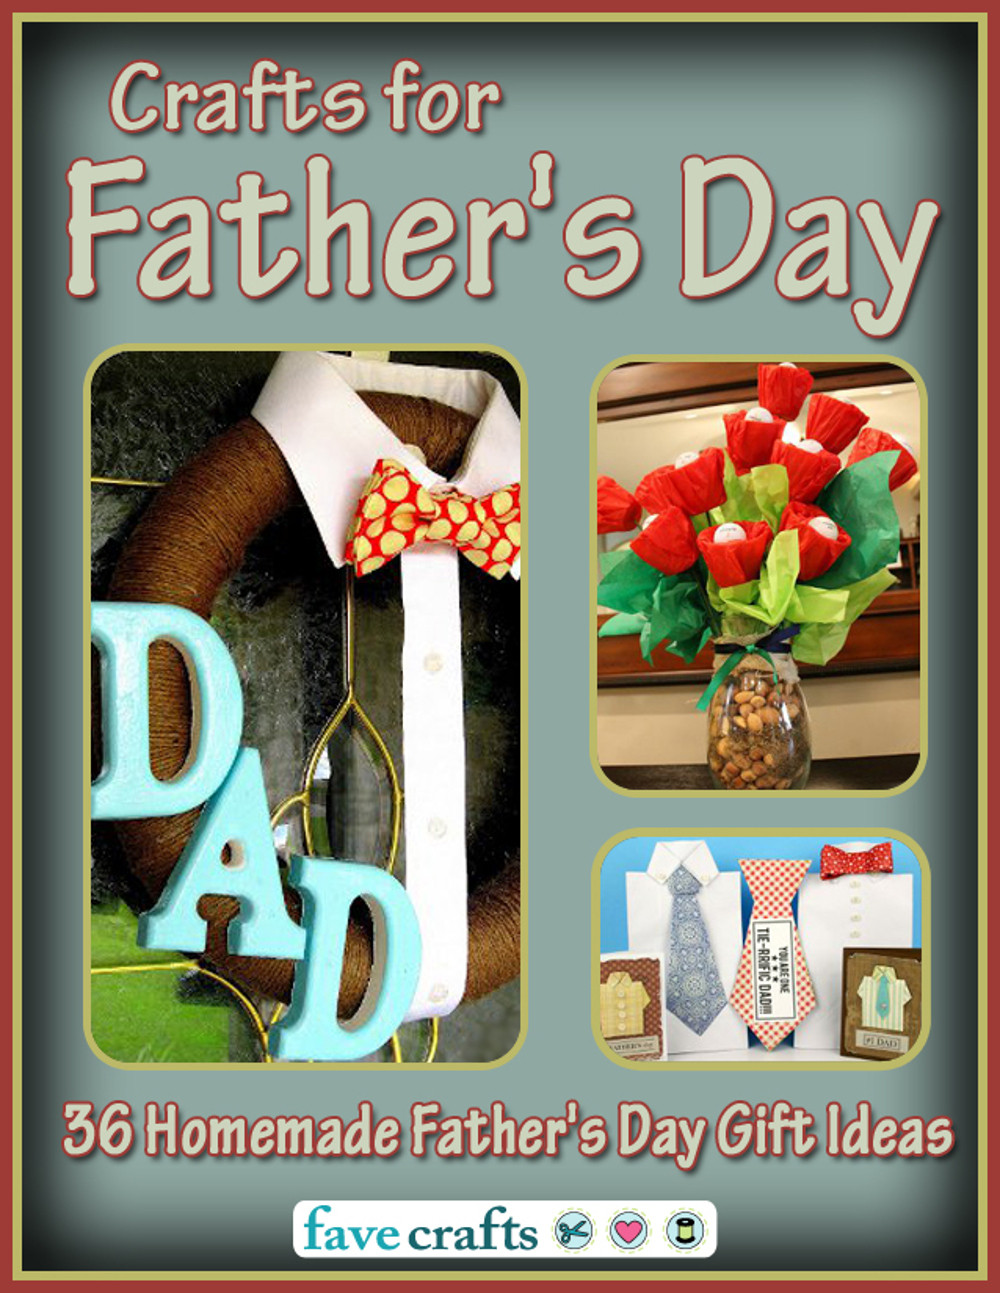 Free Fathers Day Gift Ideas
 Crafts for Father s Day 36 Homemade Father s Day Gift